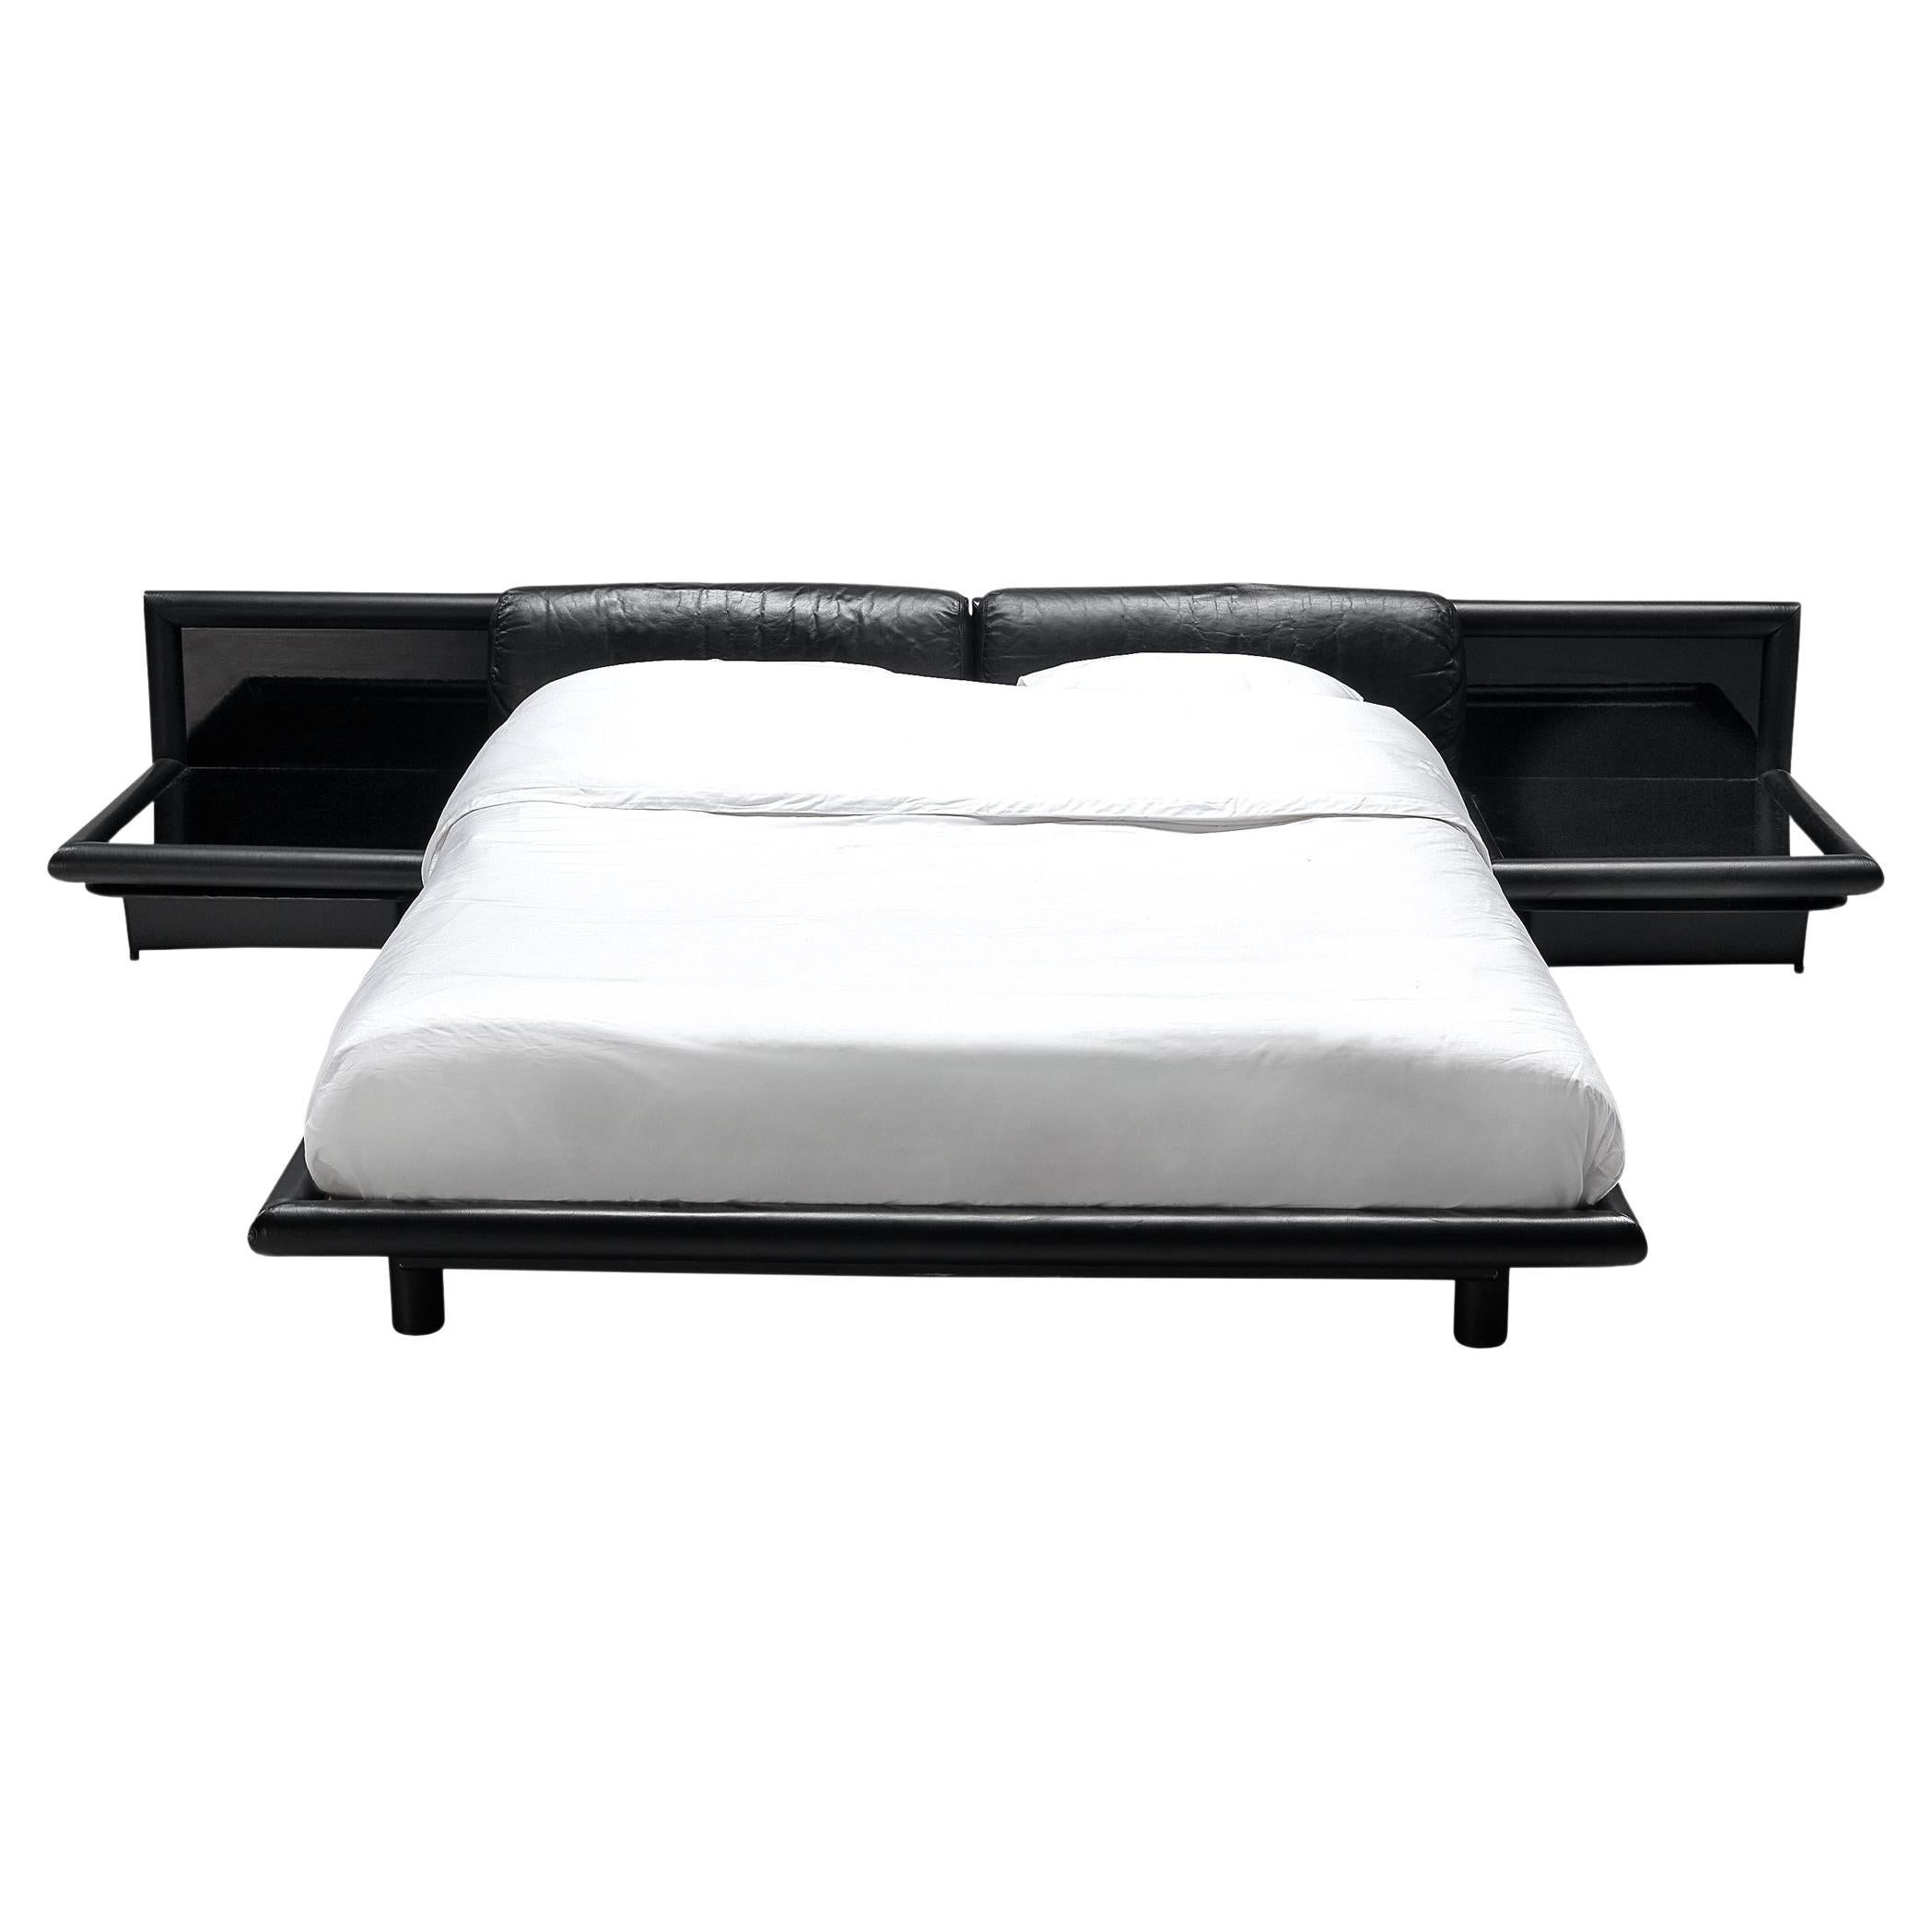 Afra & Tobia Scarpa for Molteni ‘Morna’ Bed with Nightstands  For Sale